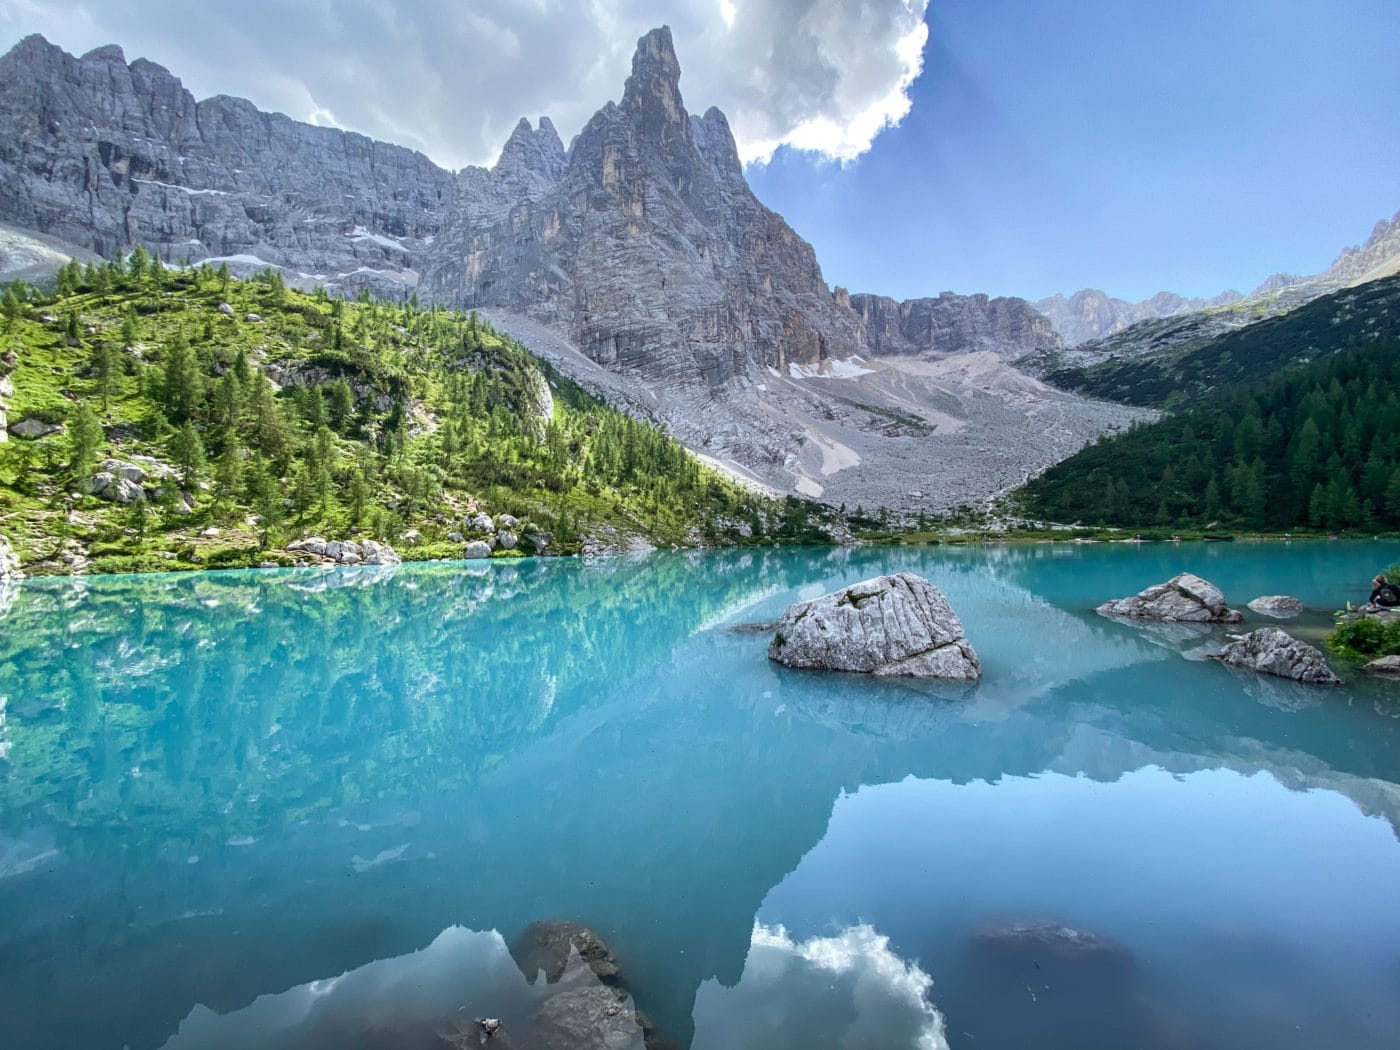 Lago Sorapis an alpine lake in the Dolomites Italy with monumental mountain peak in the background called "dito di dio"